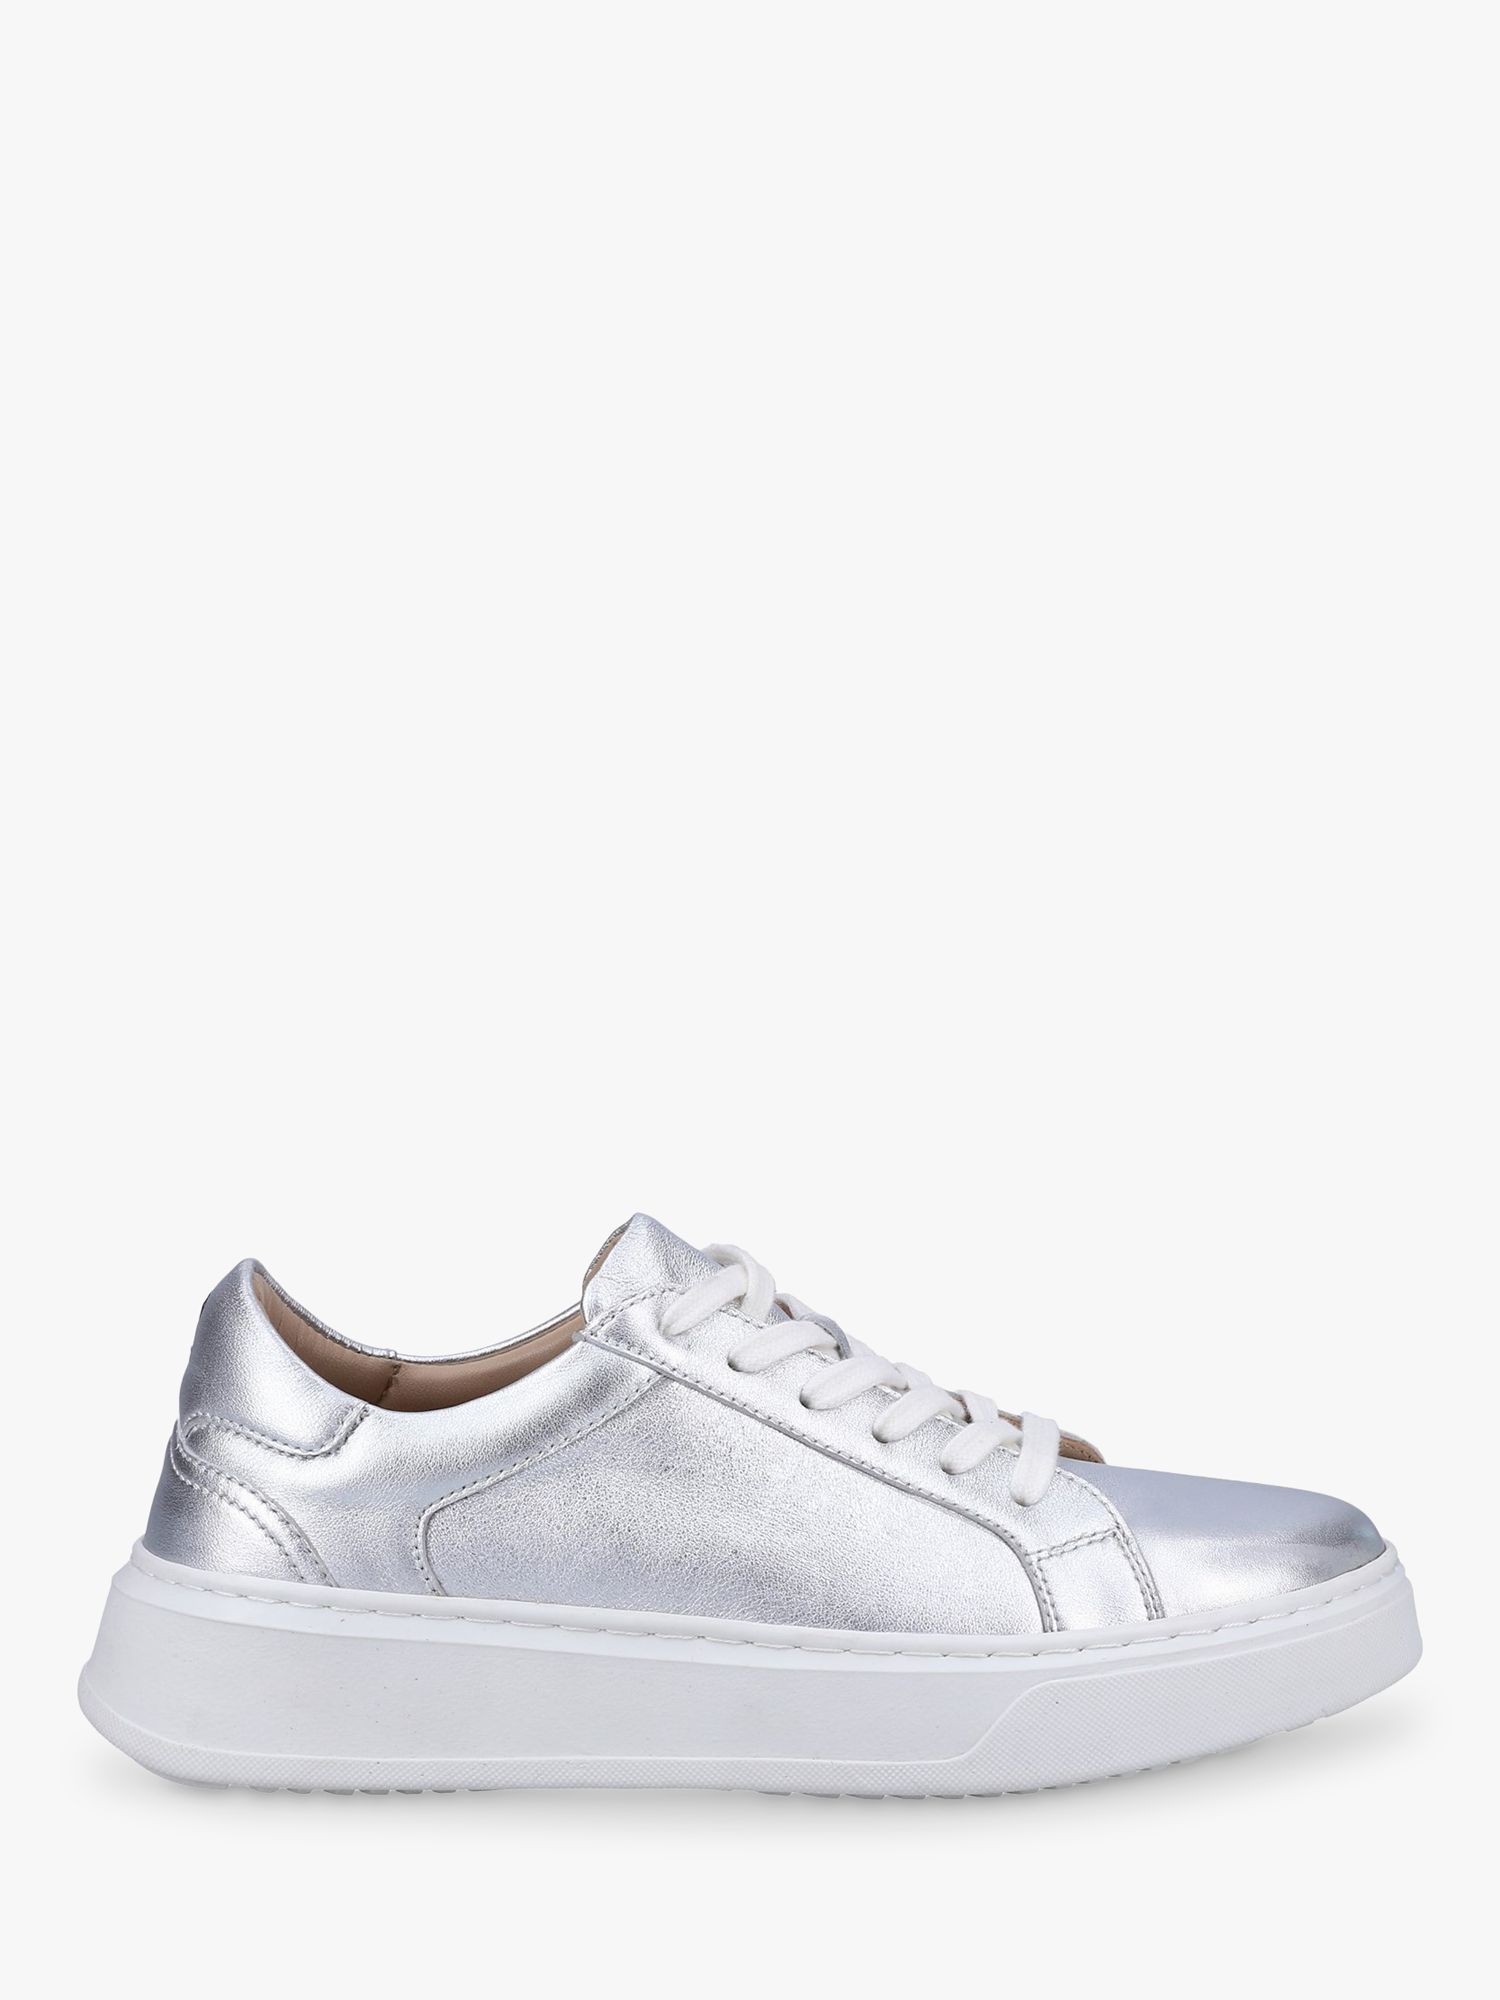 Hush Puppies Camille Lace-Up Leather Trainers, Silver at John Lewis ...